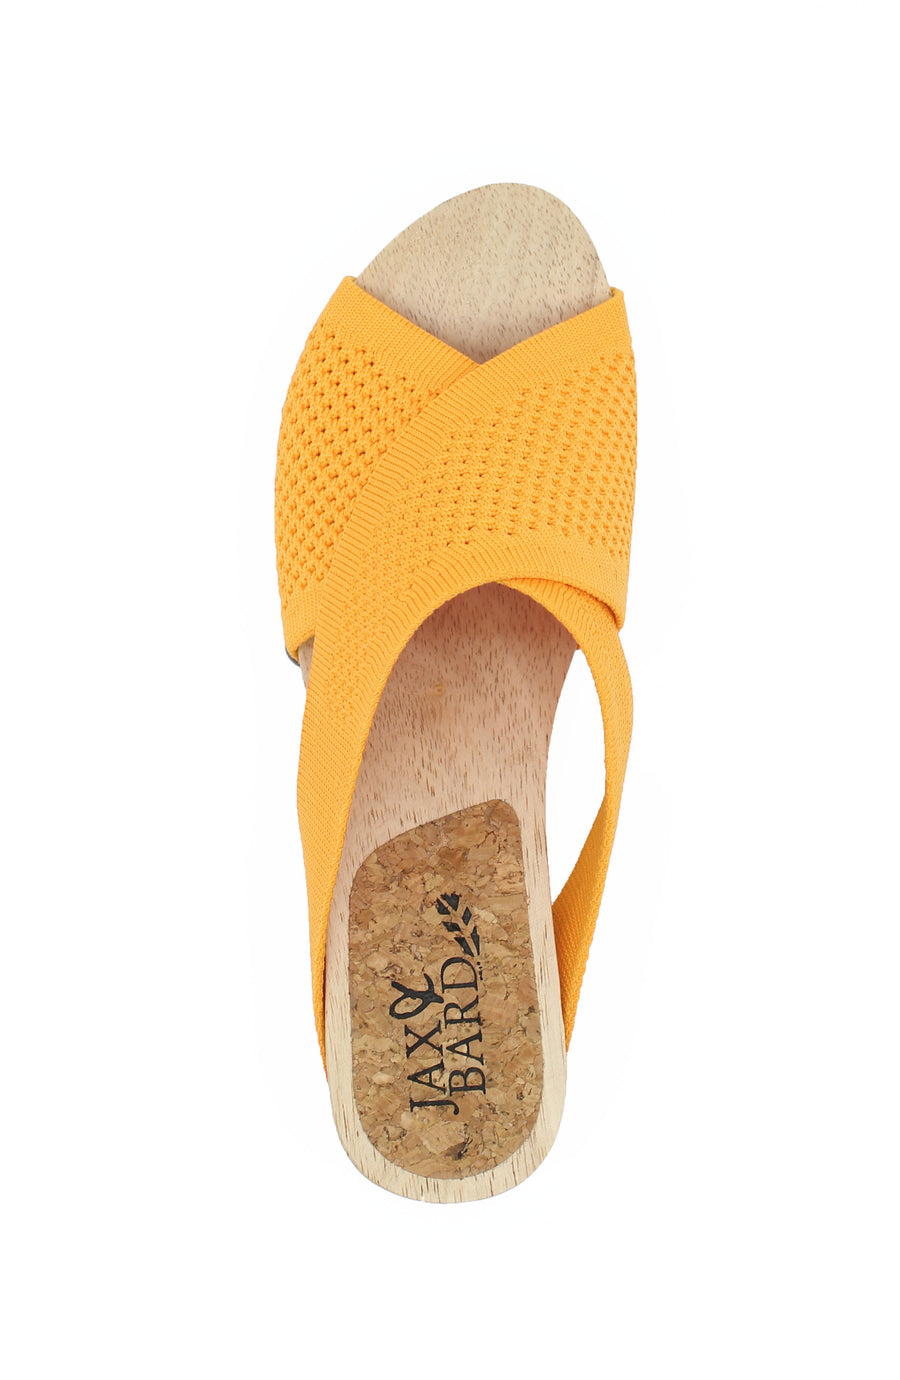 CLEARANCE - LIBBY HILL in BRIGHT YELLOW